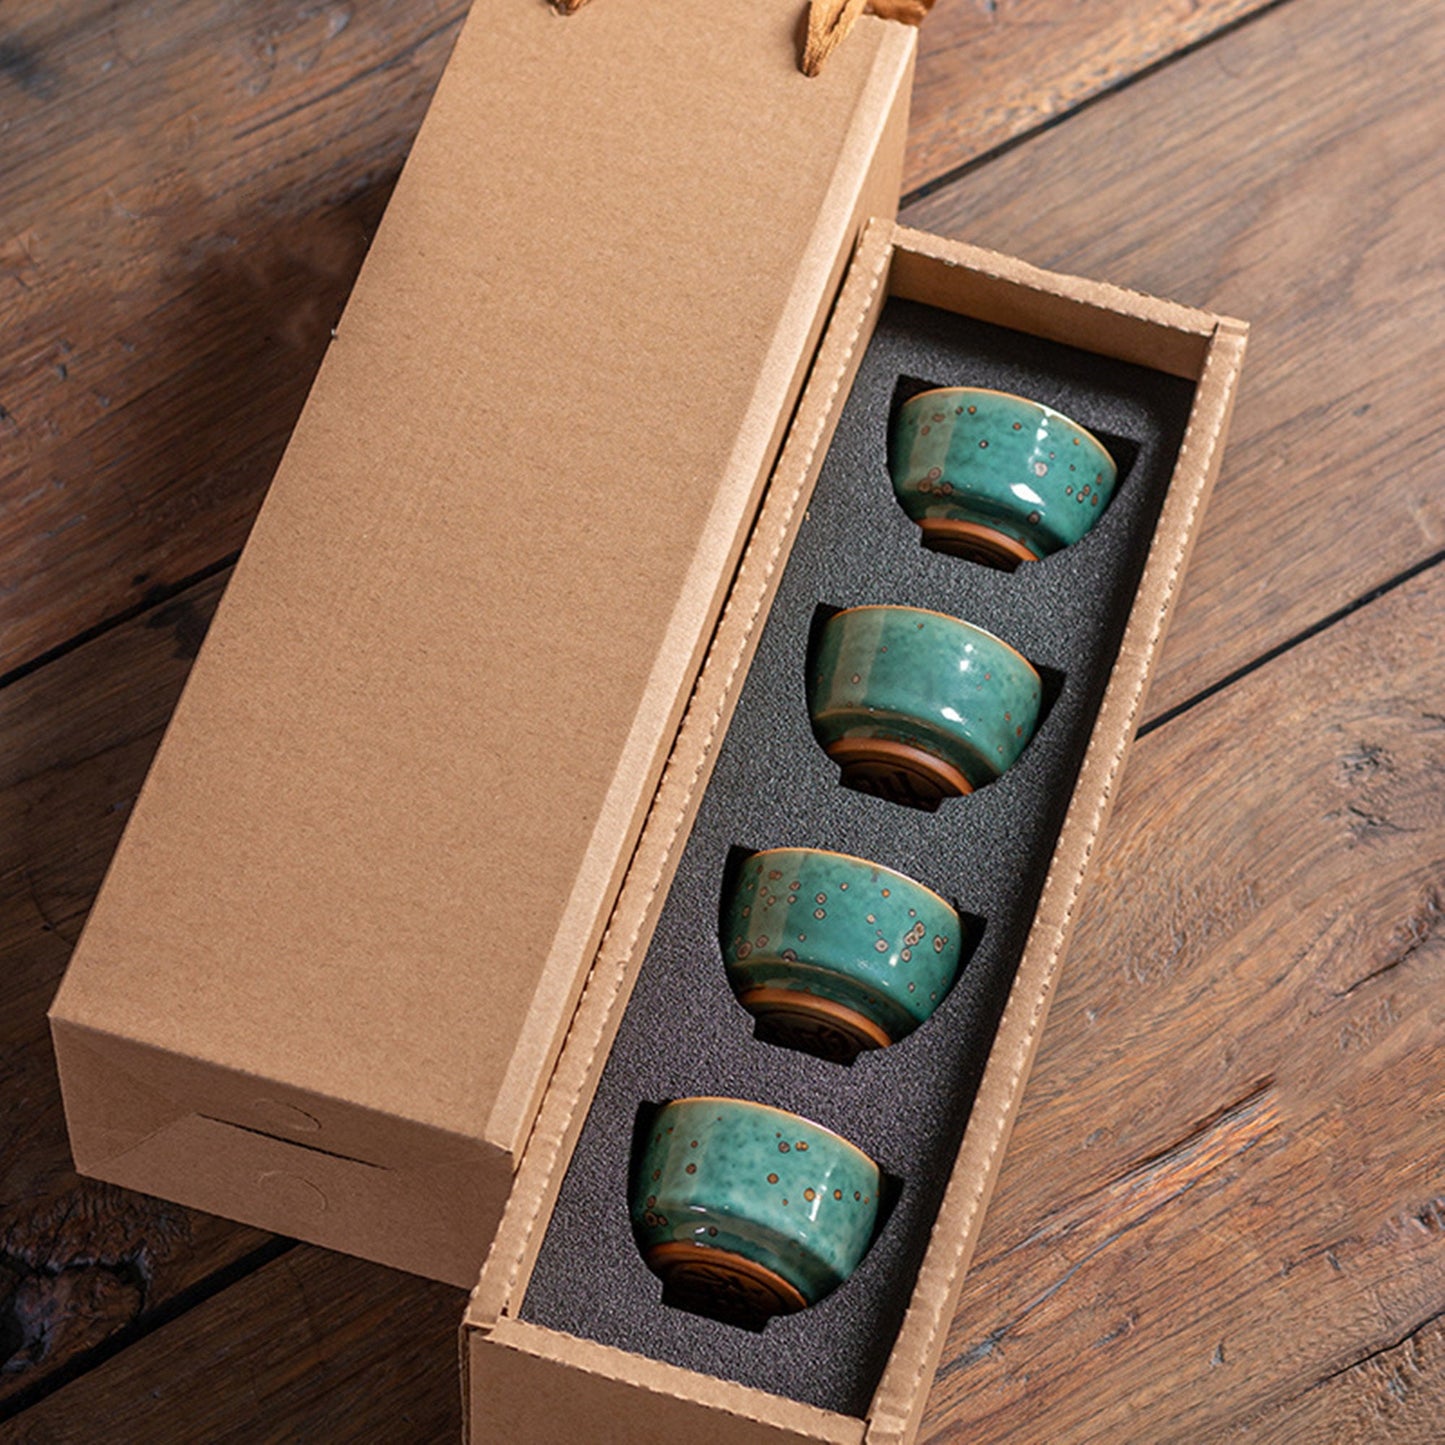 Ceramic Green Mountain Glaze Teacup Sets of 4  -Mean ''Good Luck And Happiness To You'' Chinese Kung Fu Cup 75ml